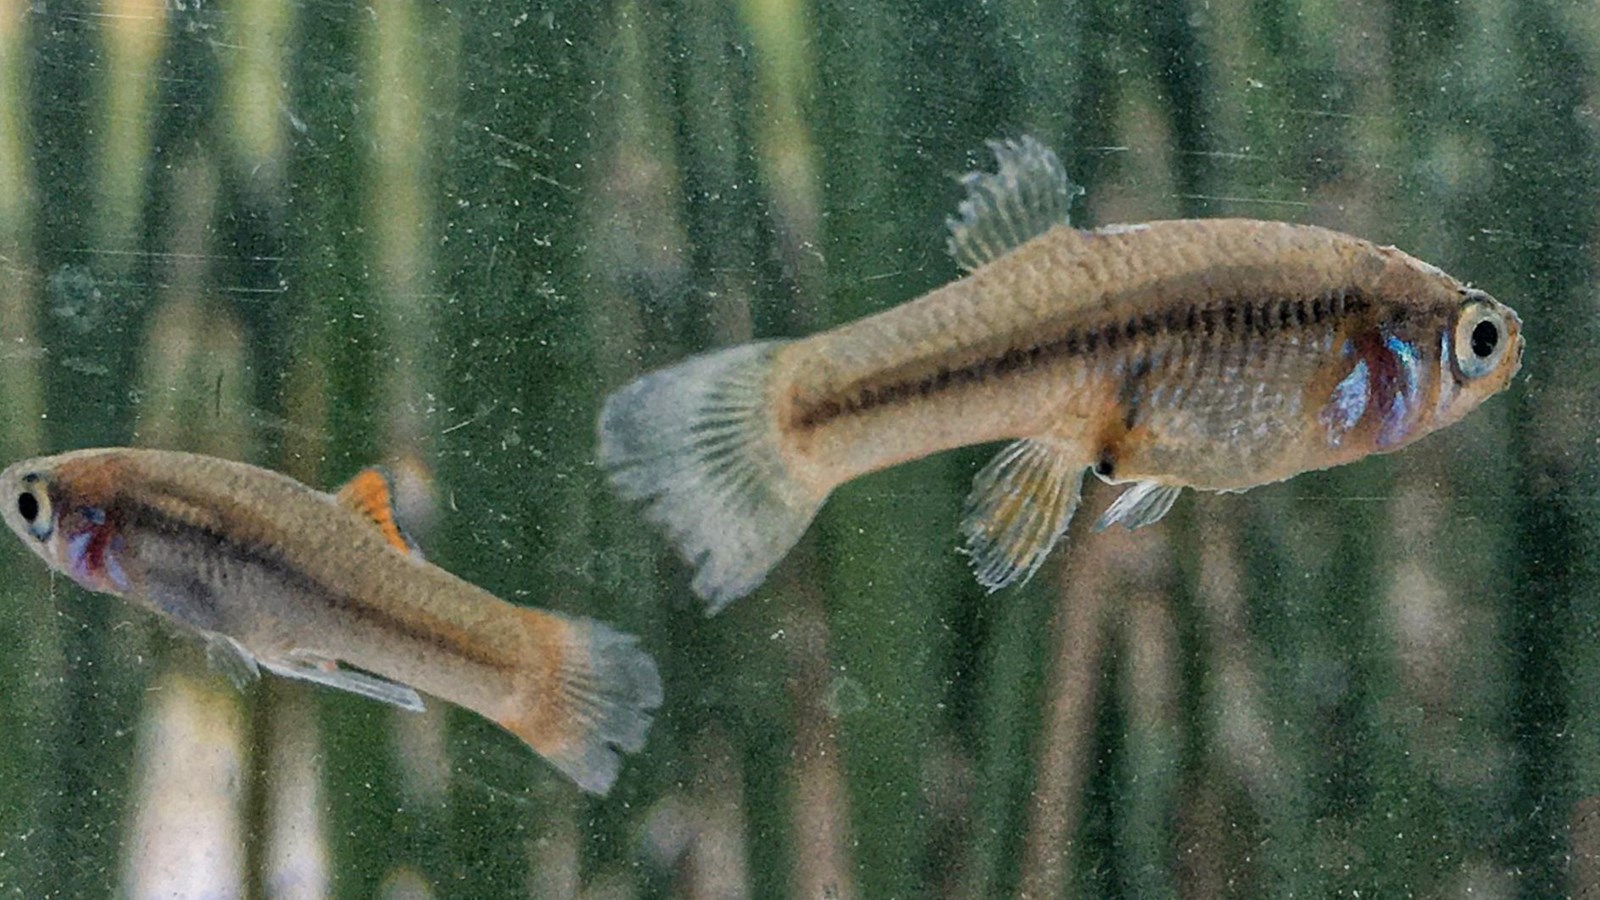 Two tiny fish are pictured in a tank of water with a ruler held below them to give a sense of scale.